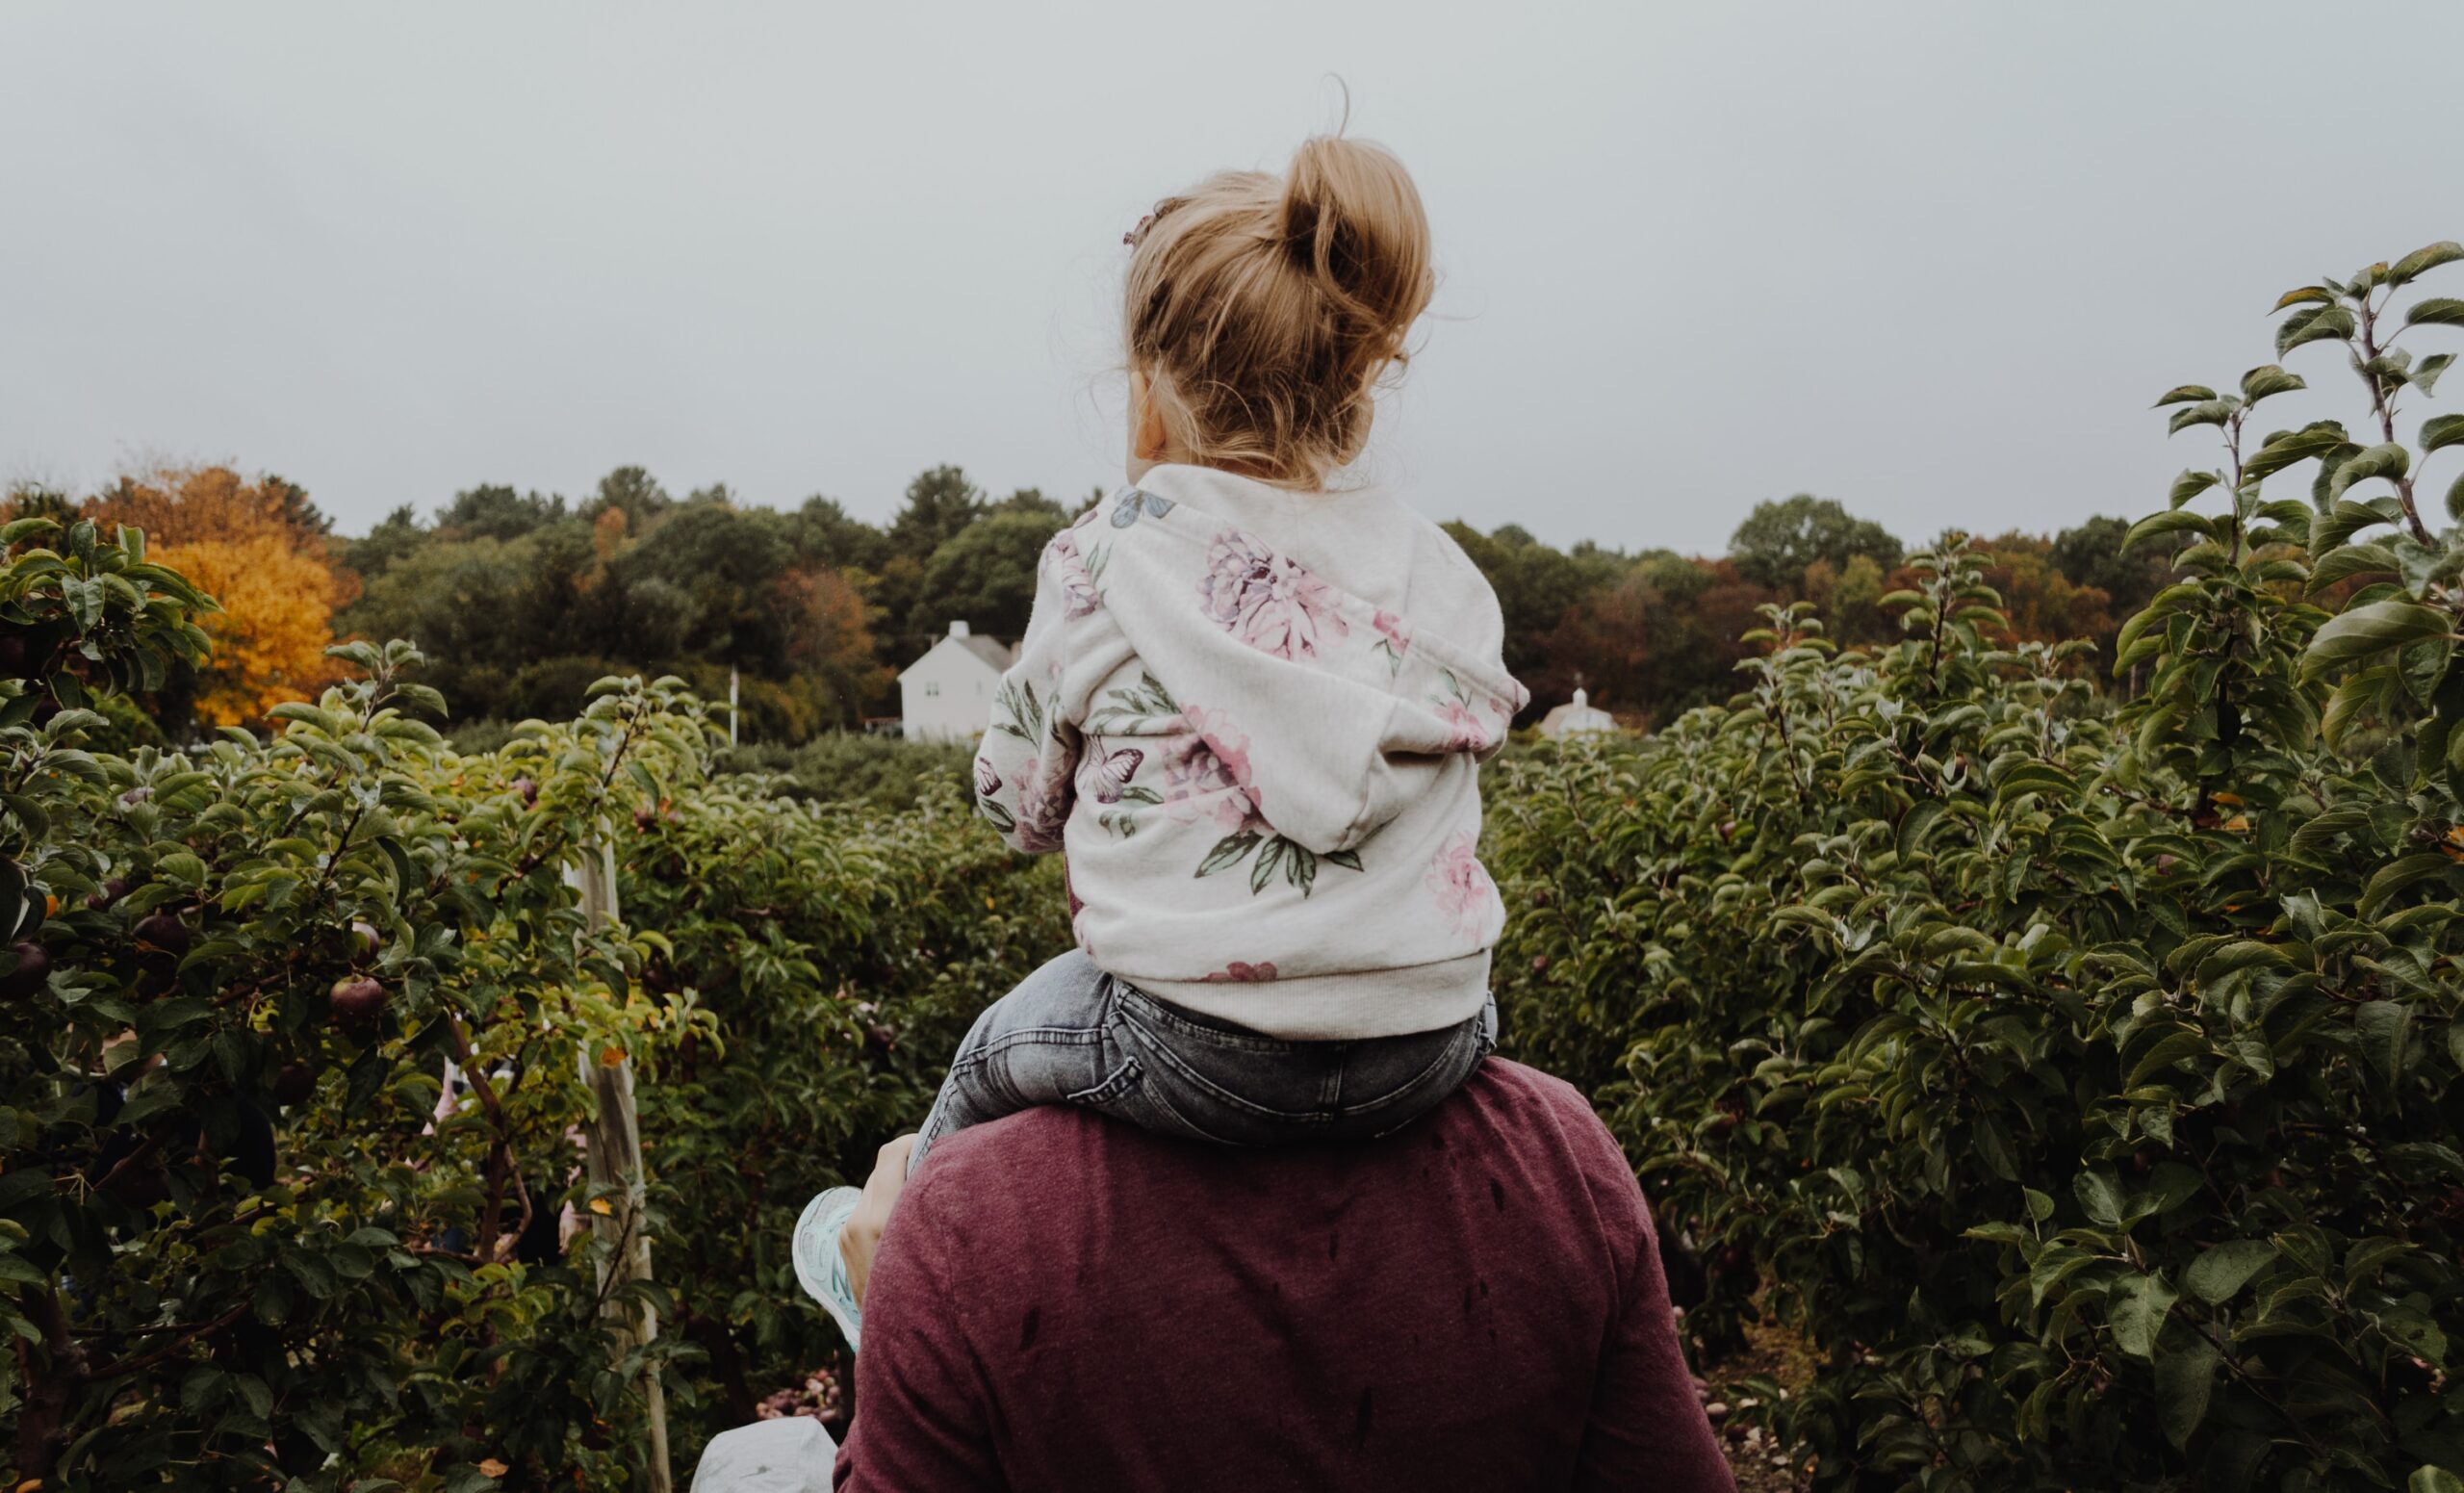 A father and child spending quality time together, representing the importance of enforcing court orders for the well-being of families, a focus of our law firm's expertise.